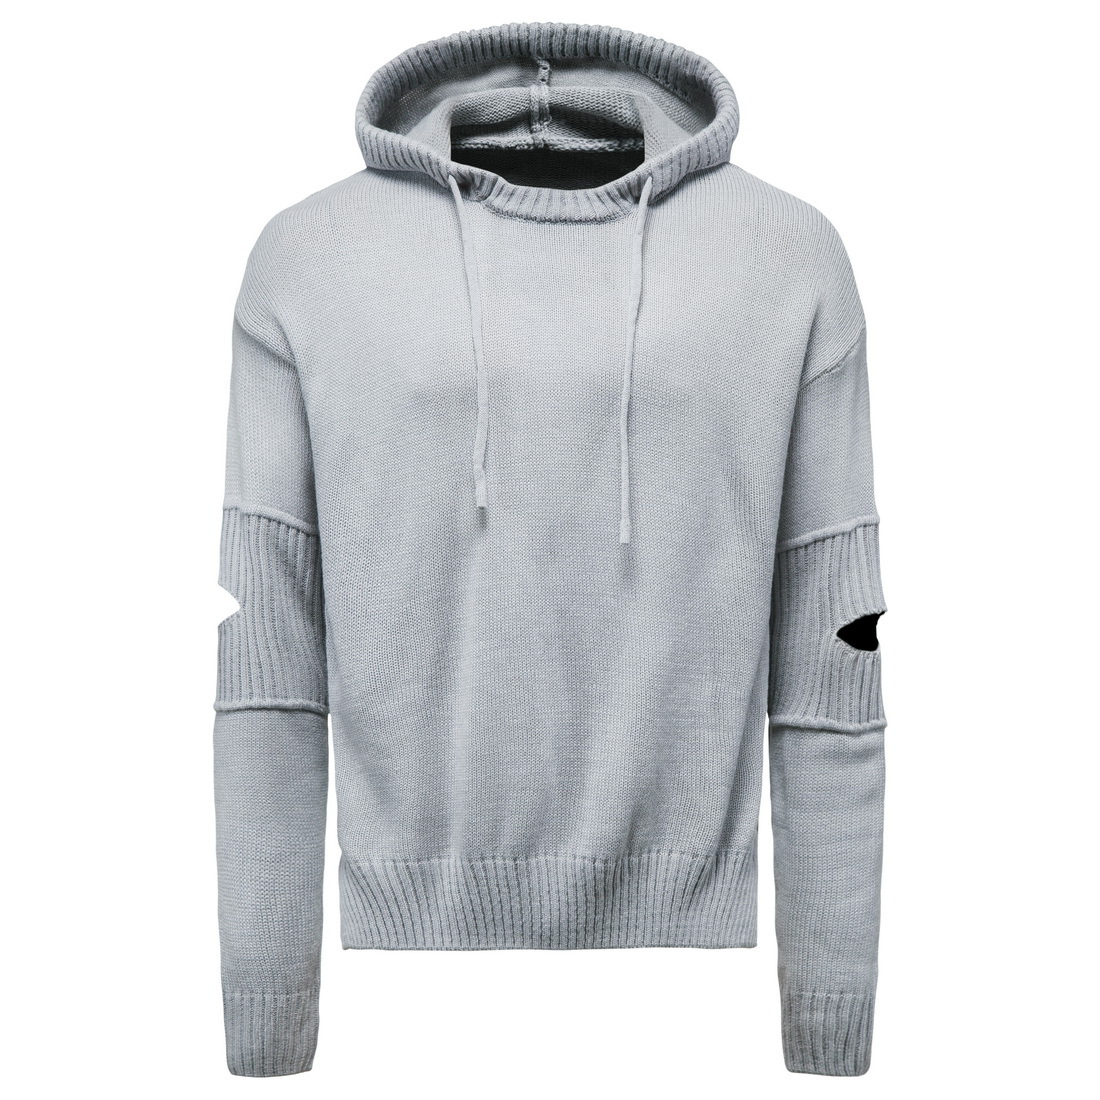  New Fashion Men Knitted Sweater Pullover Autumn Clothing solid Plus Size Hooded Hoodies